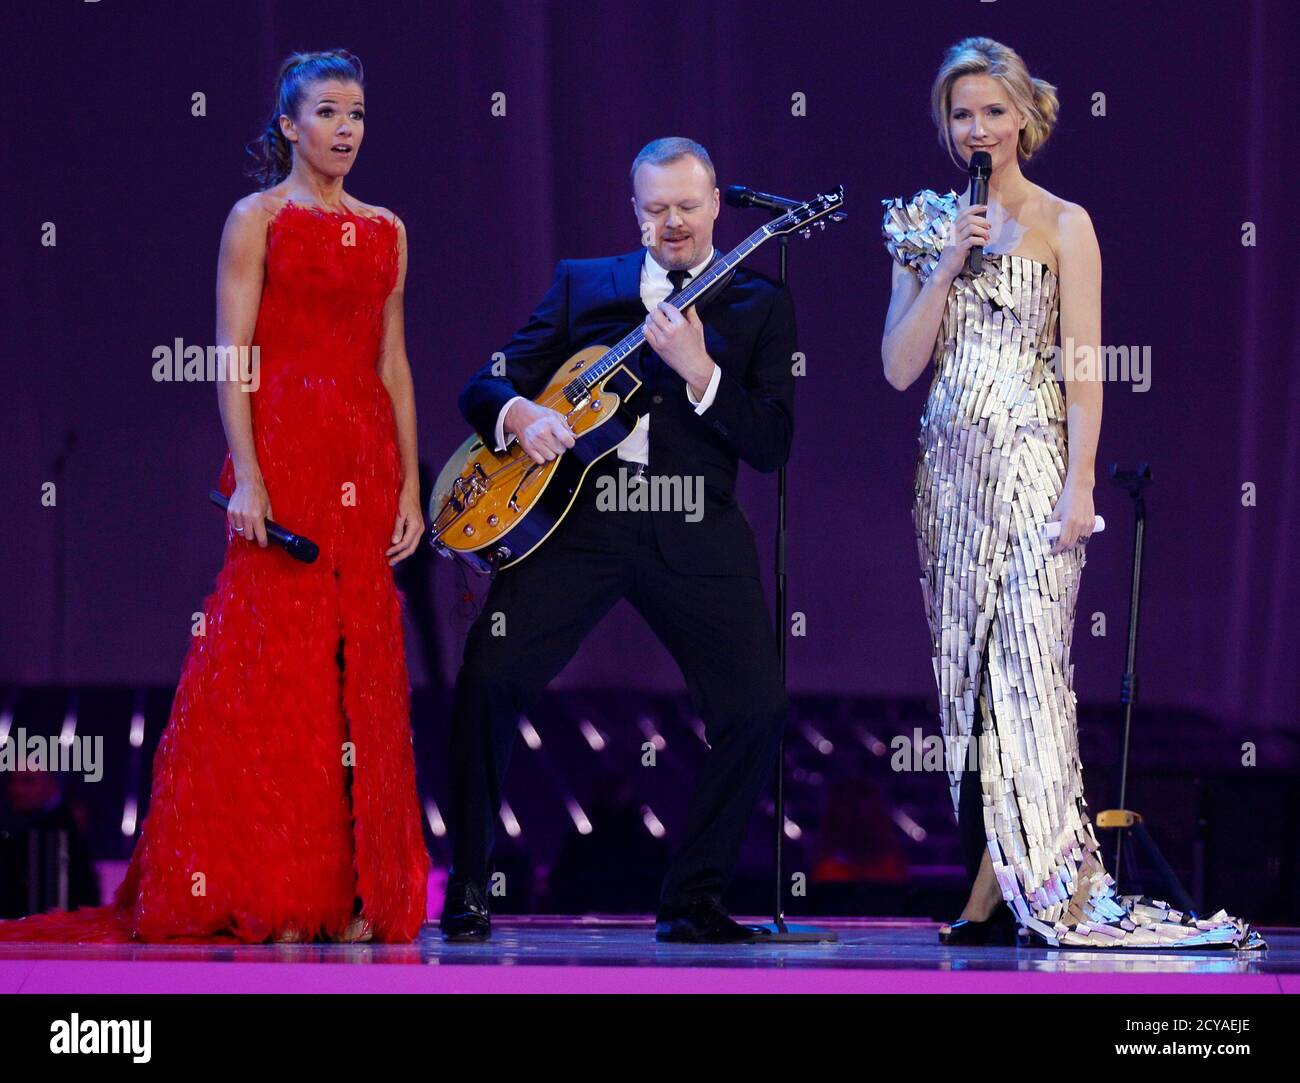 German TV entertainers and Eurovision Song Contest hosts Anke Engelke, Stefan Raab and Judith Rakers (L-R) perform during a rehearsal in Duesseldorf May 13, 2011. The 2011 Eurovision Song Contest final will be held in the western German city of Duesseldorf on May 14.  REUTERS/Wolfgang Rattay (GERMANY  - Tags: ENTERTAINMENT) Stock Photo